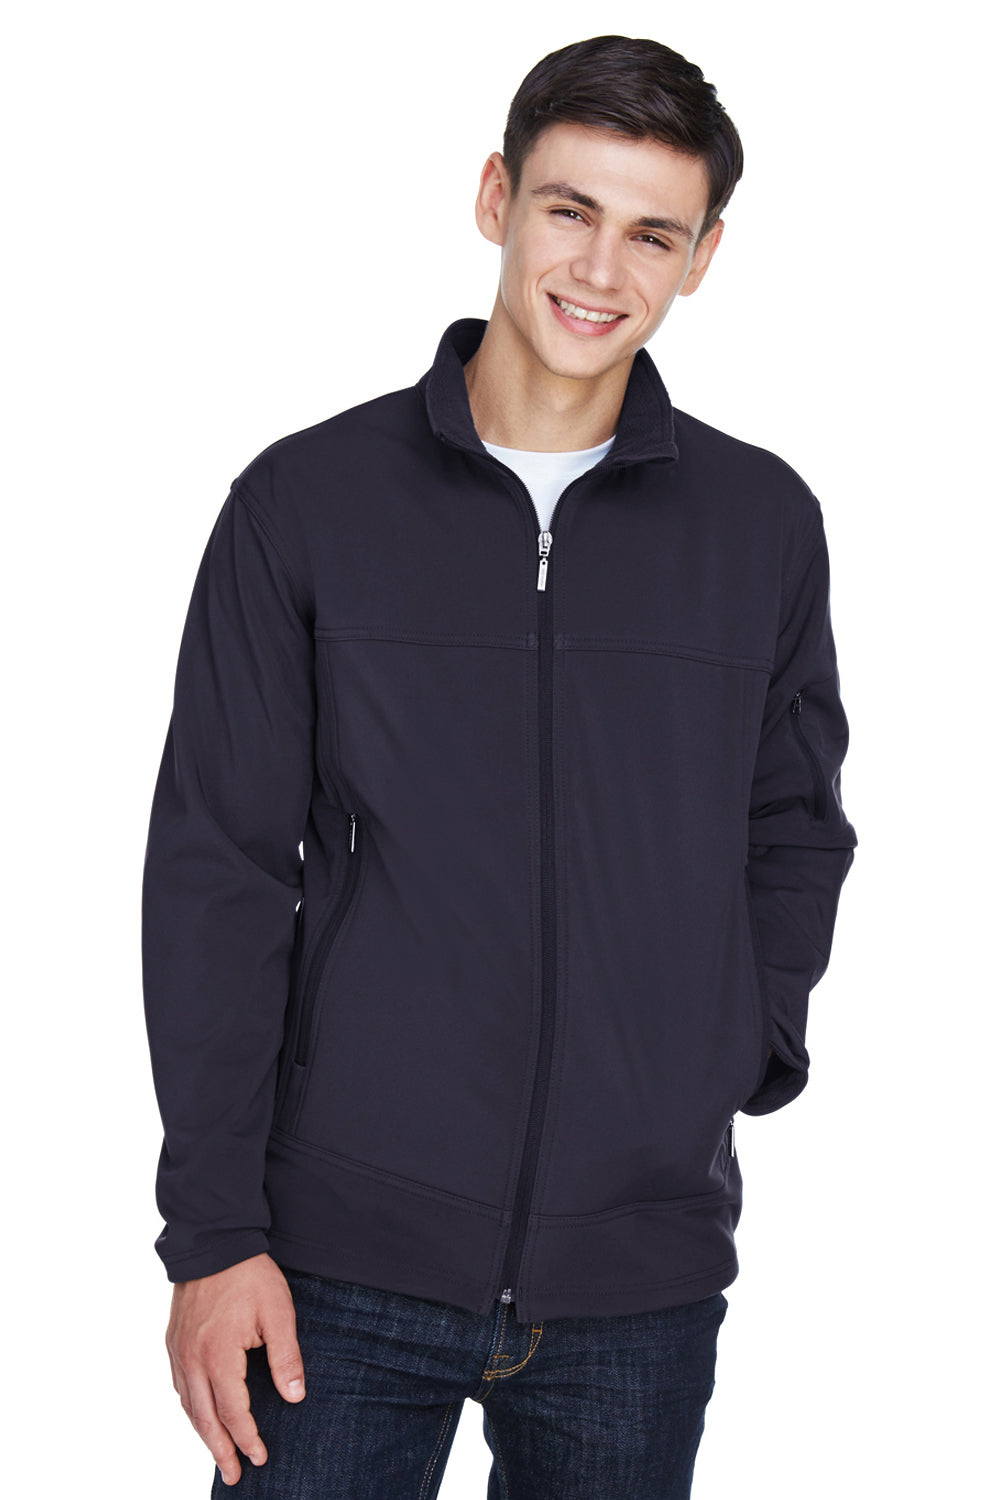 North End 88099 Mens Performance Water Resistant Full Zip Jacket Navy Blue Front